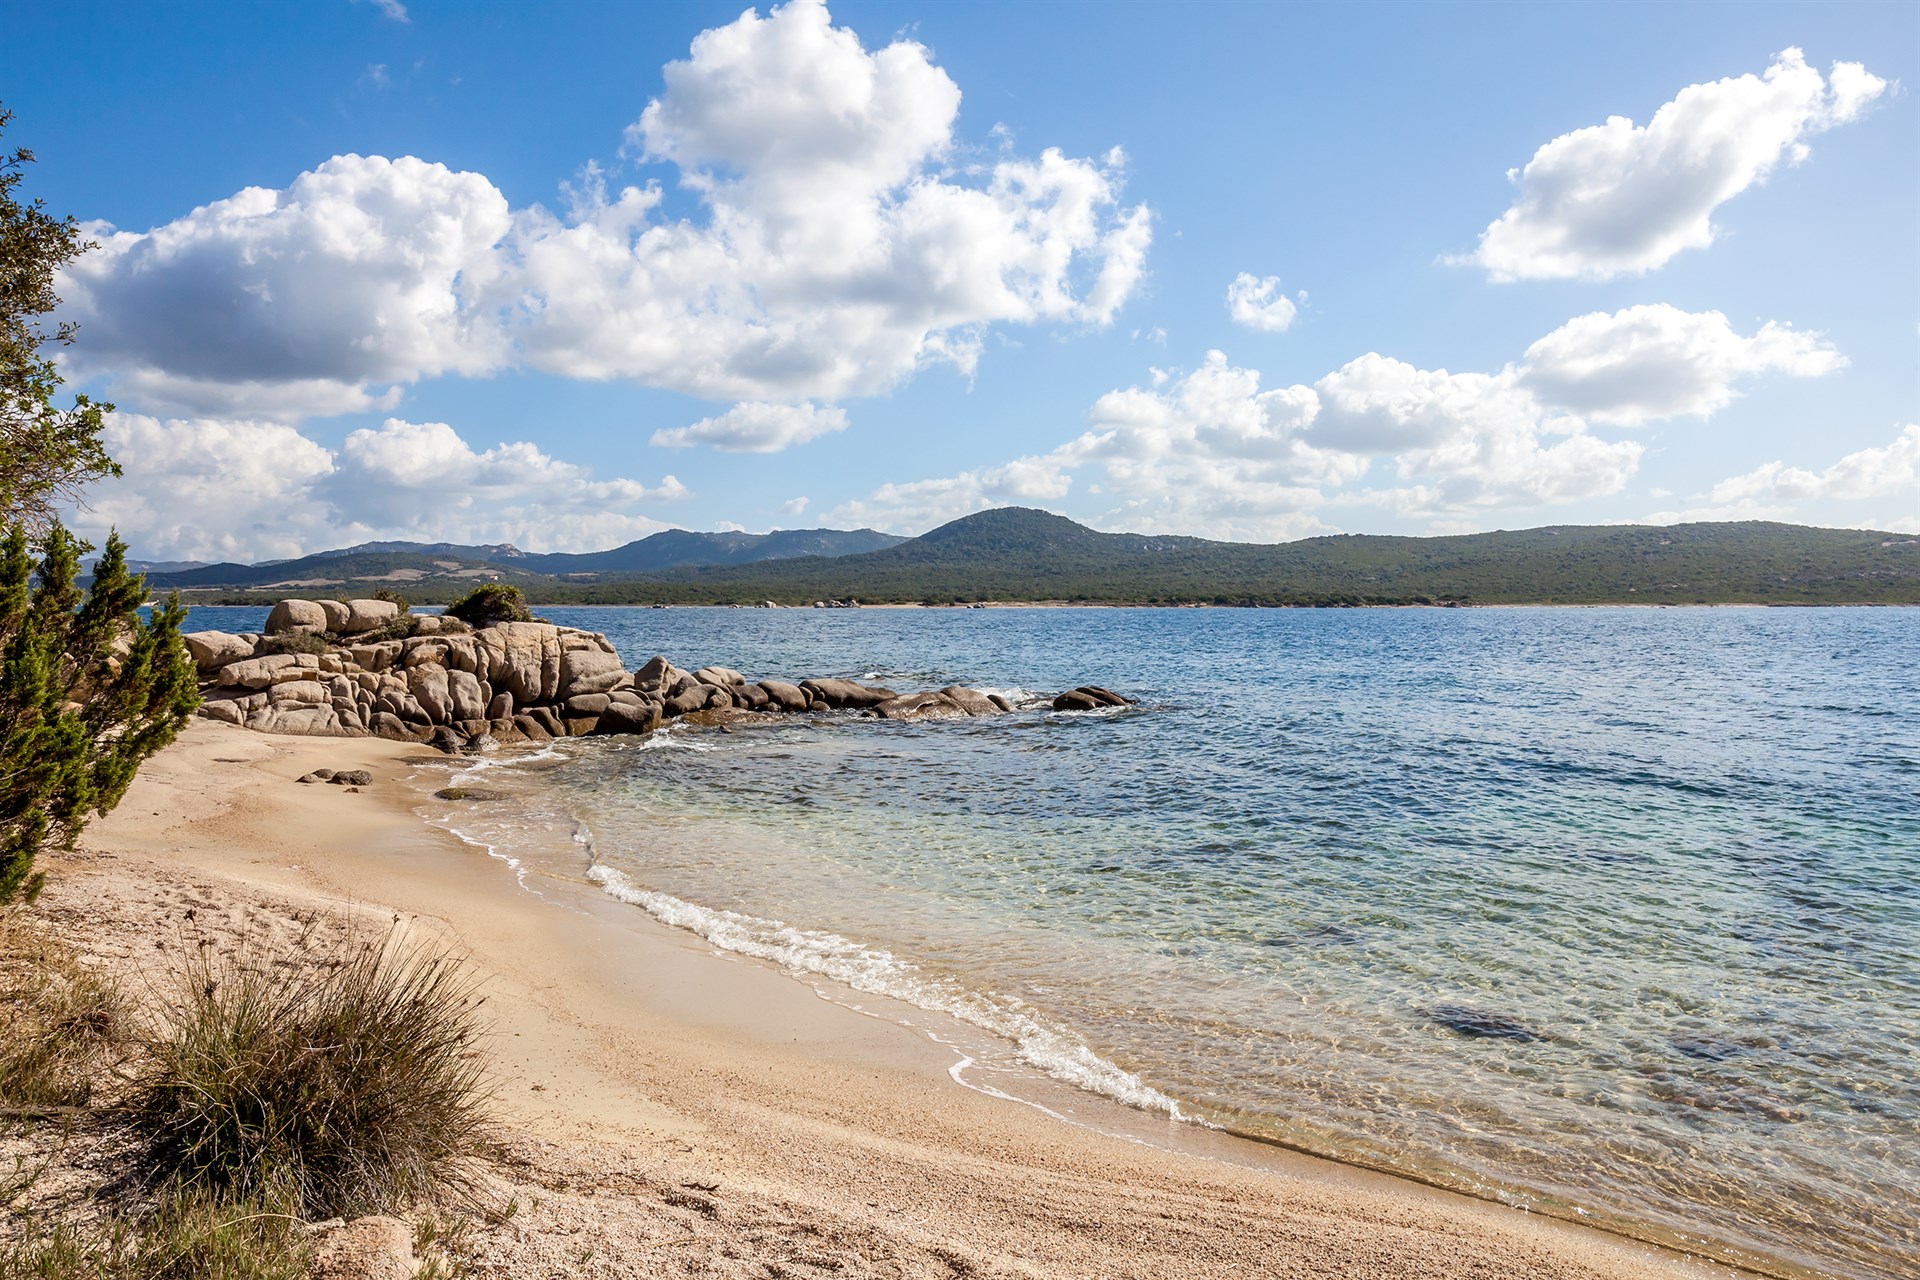 Wondering where to spend your holidays? Explore our villas in Corsica for a relaxing beach holiday